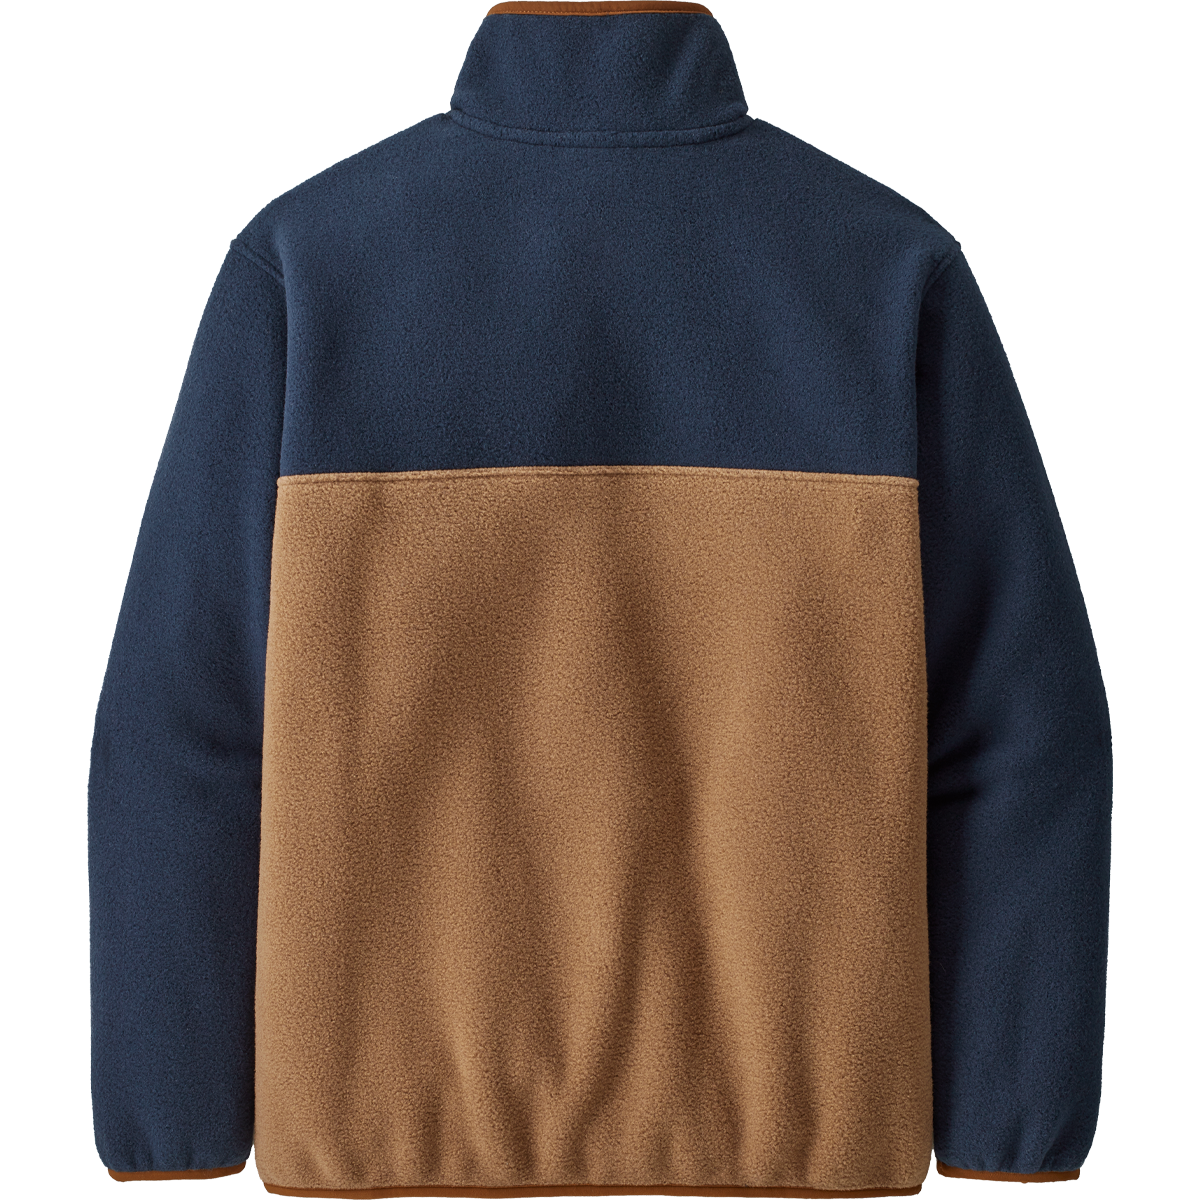 Youth Lightweight Synchilla Snap-T Fleece Pullover alternate view